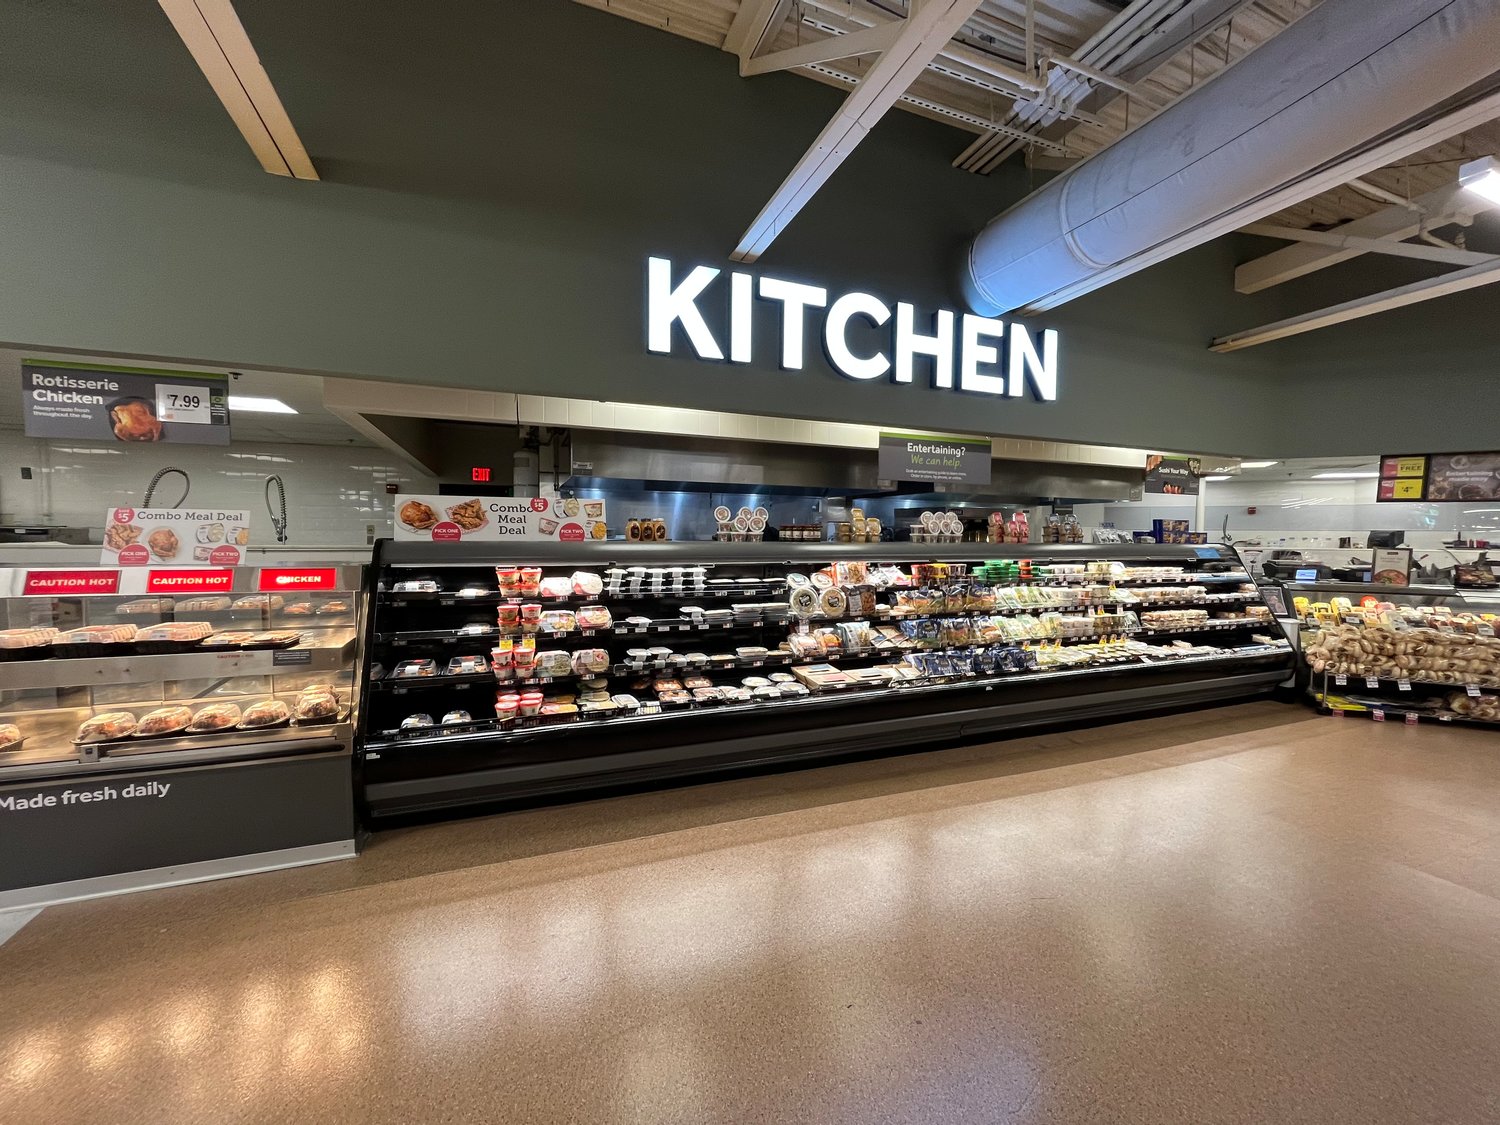 The expanded kitchen at the renovated Stop & Shop boasts numerous new pre-made meal options, from foot-long subs to cheese-filled tortellini.